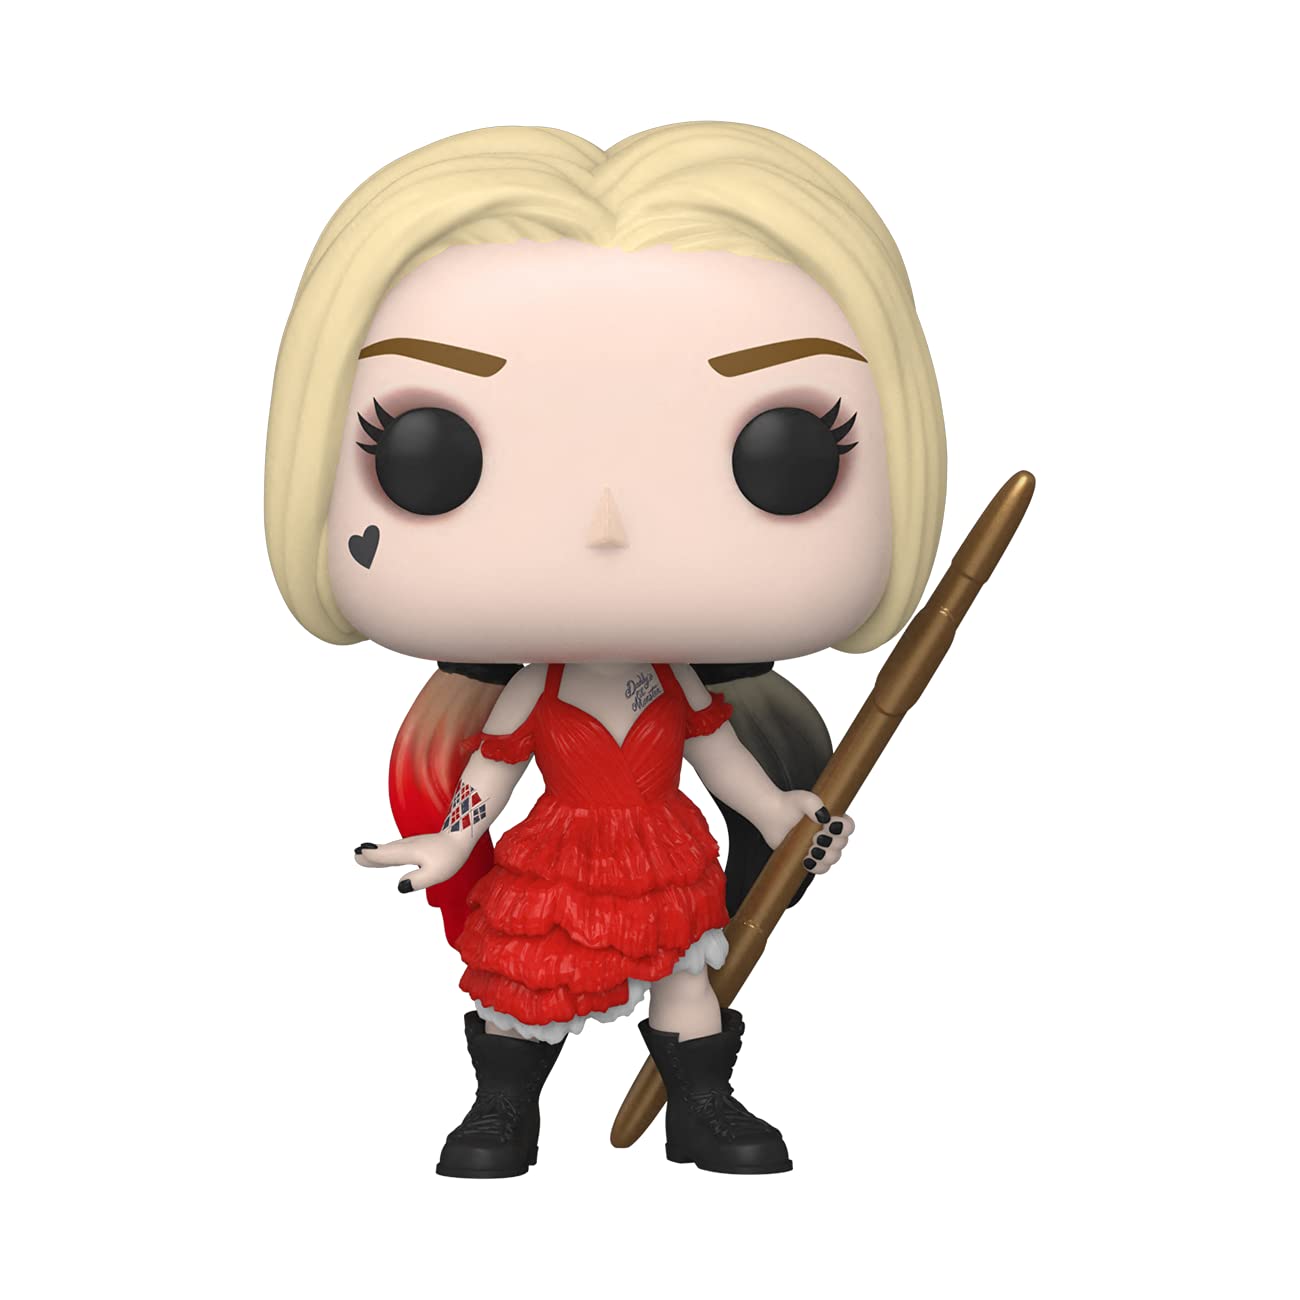 Funko POP! Movies Suicide Squad Harley Quinn #1111 [Harley Quinn in Ripped Dress] Exclusive